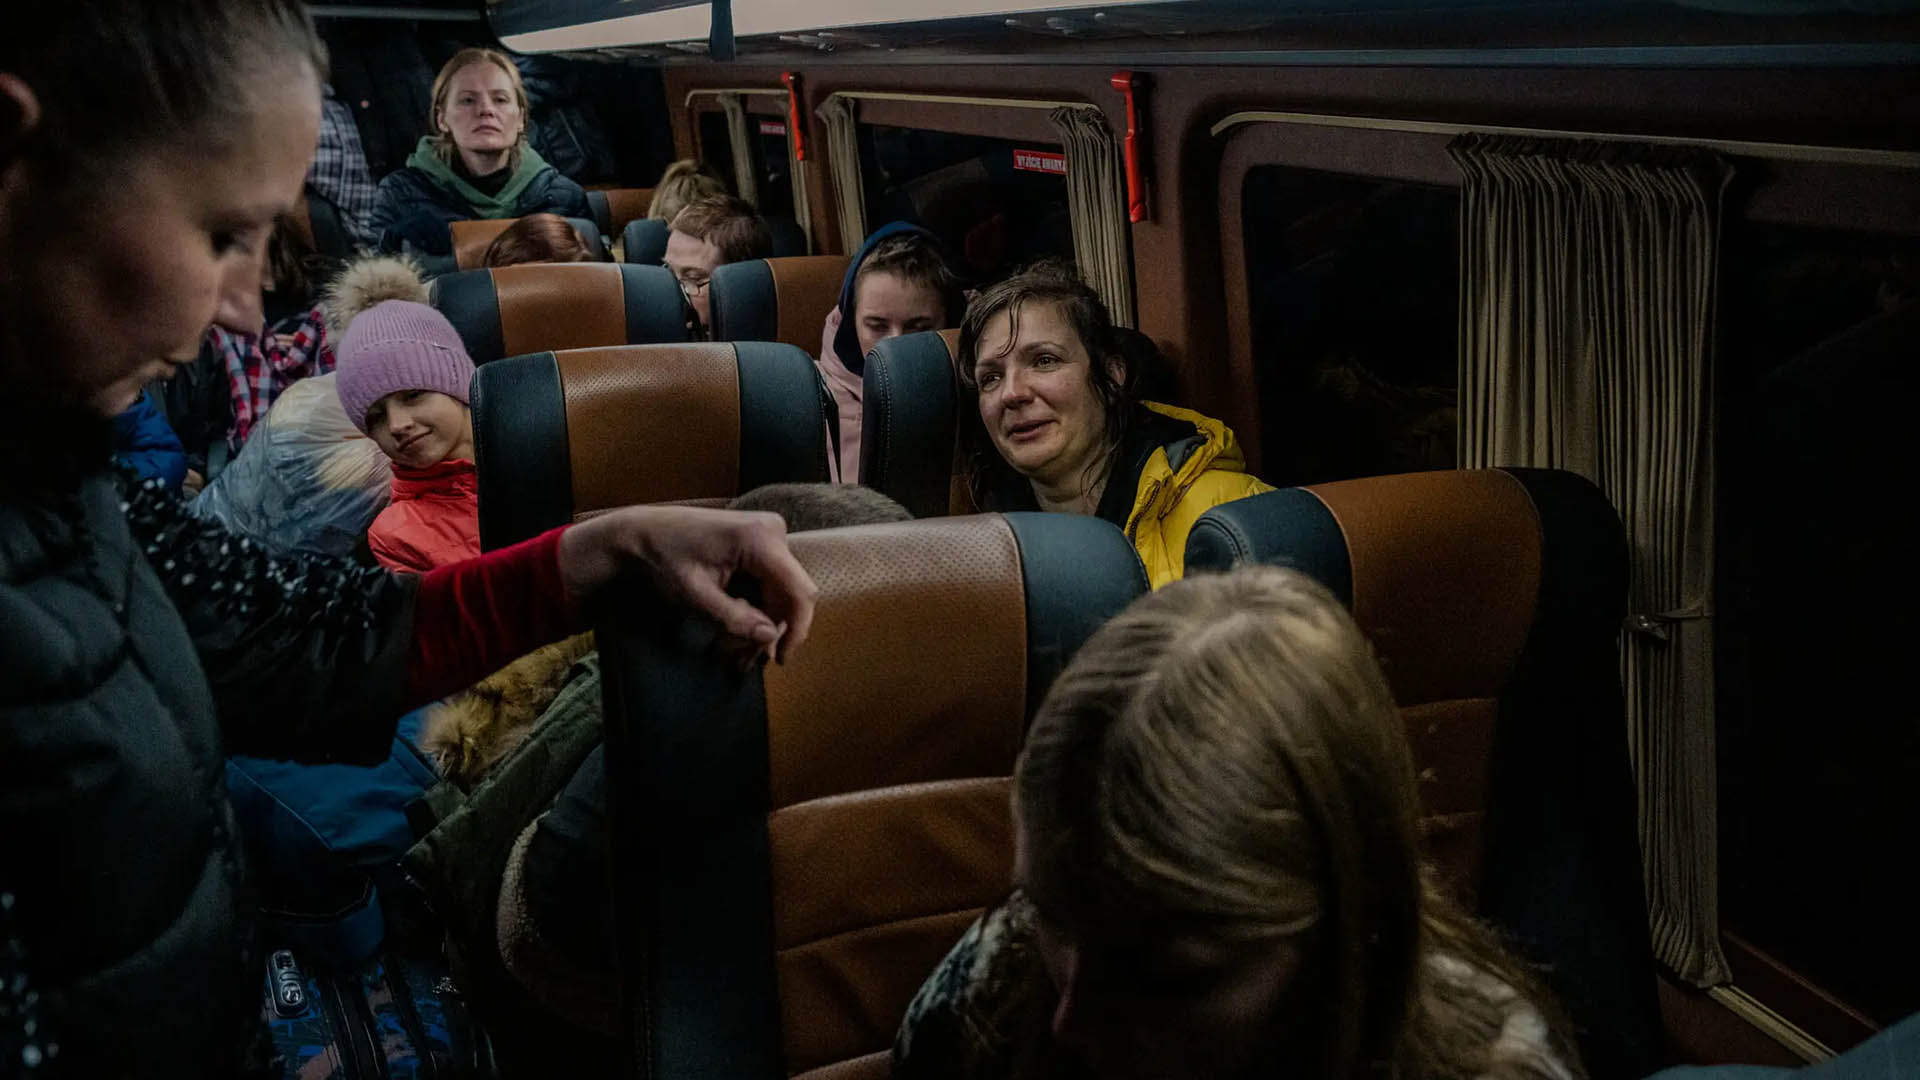 Ukrainian mothers return home with their children, near Kupyansk, Ukraine, March 11, 2023. Making a harrowing 3,000-mile journey from Ukraine to Russian-occupied territory and back, a group of mothers managed to retrieve their children from custody of the Russian authorities.  (Daniel Berehulak/The New York Times)